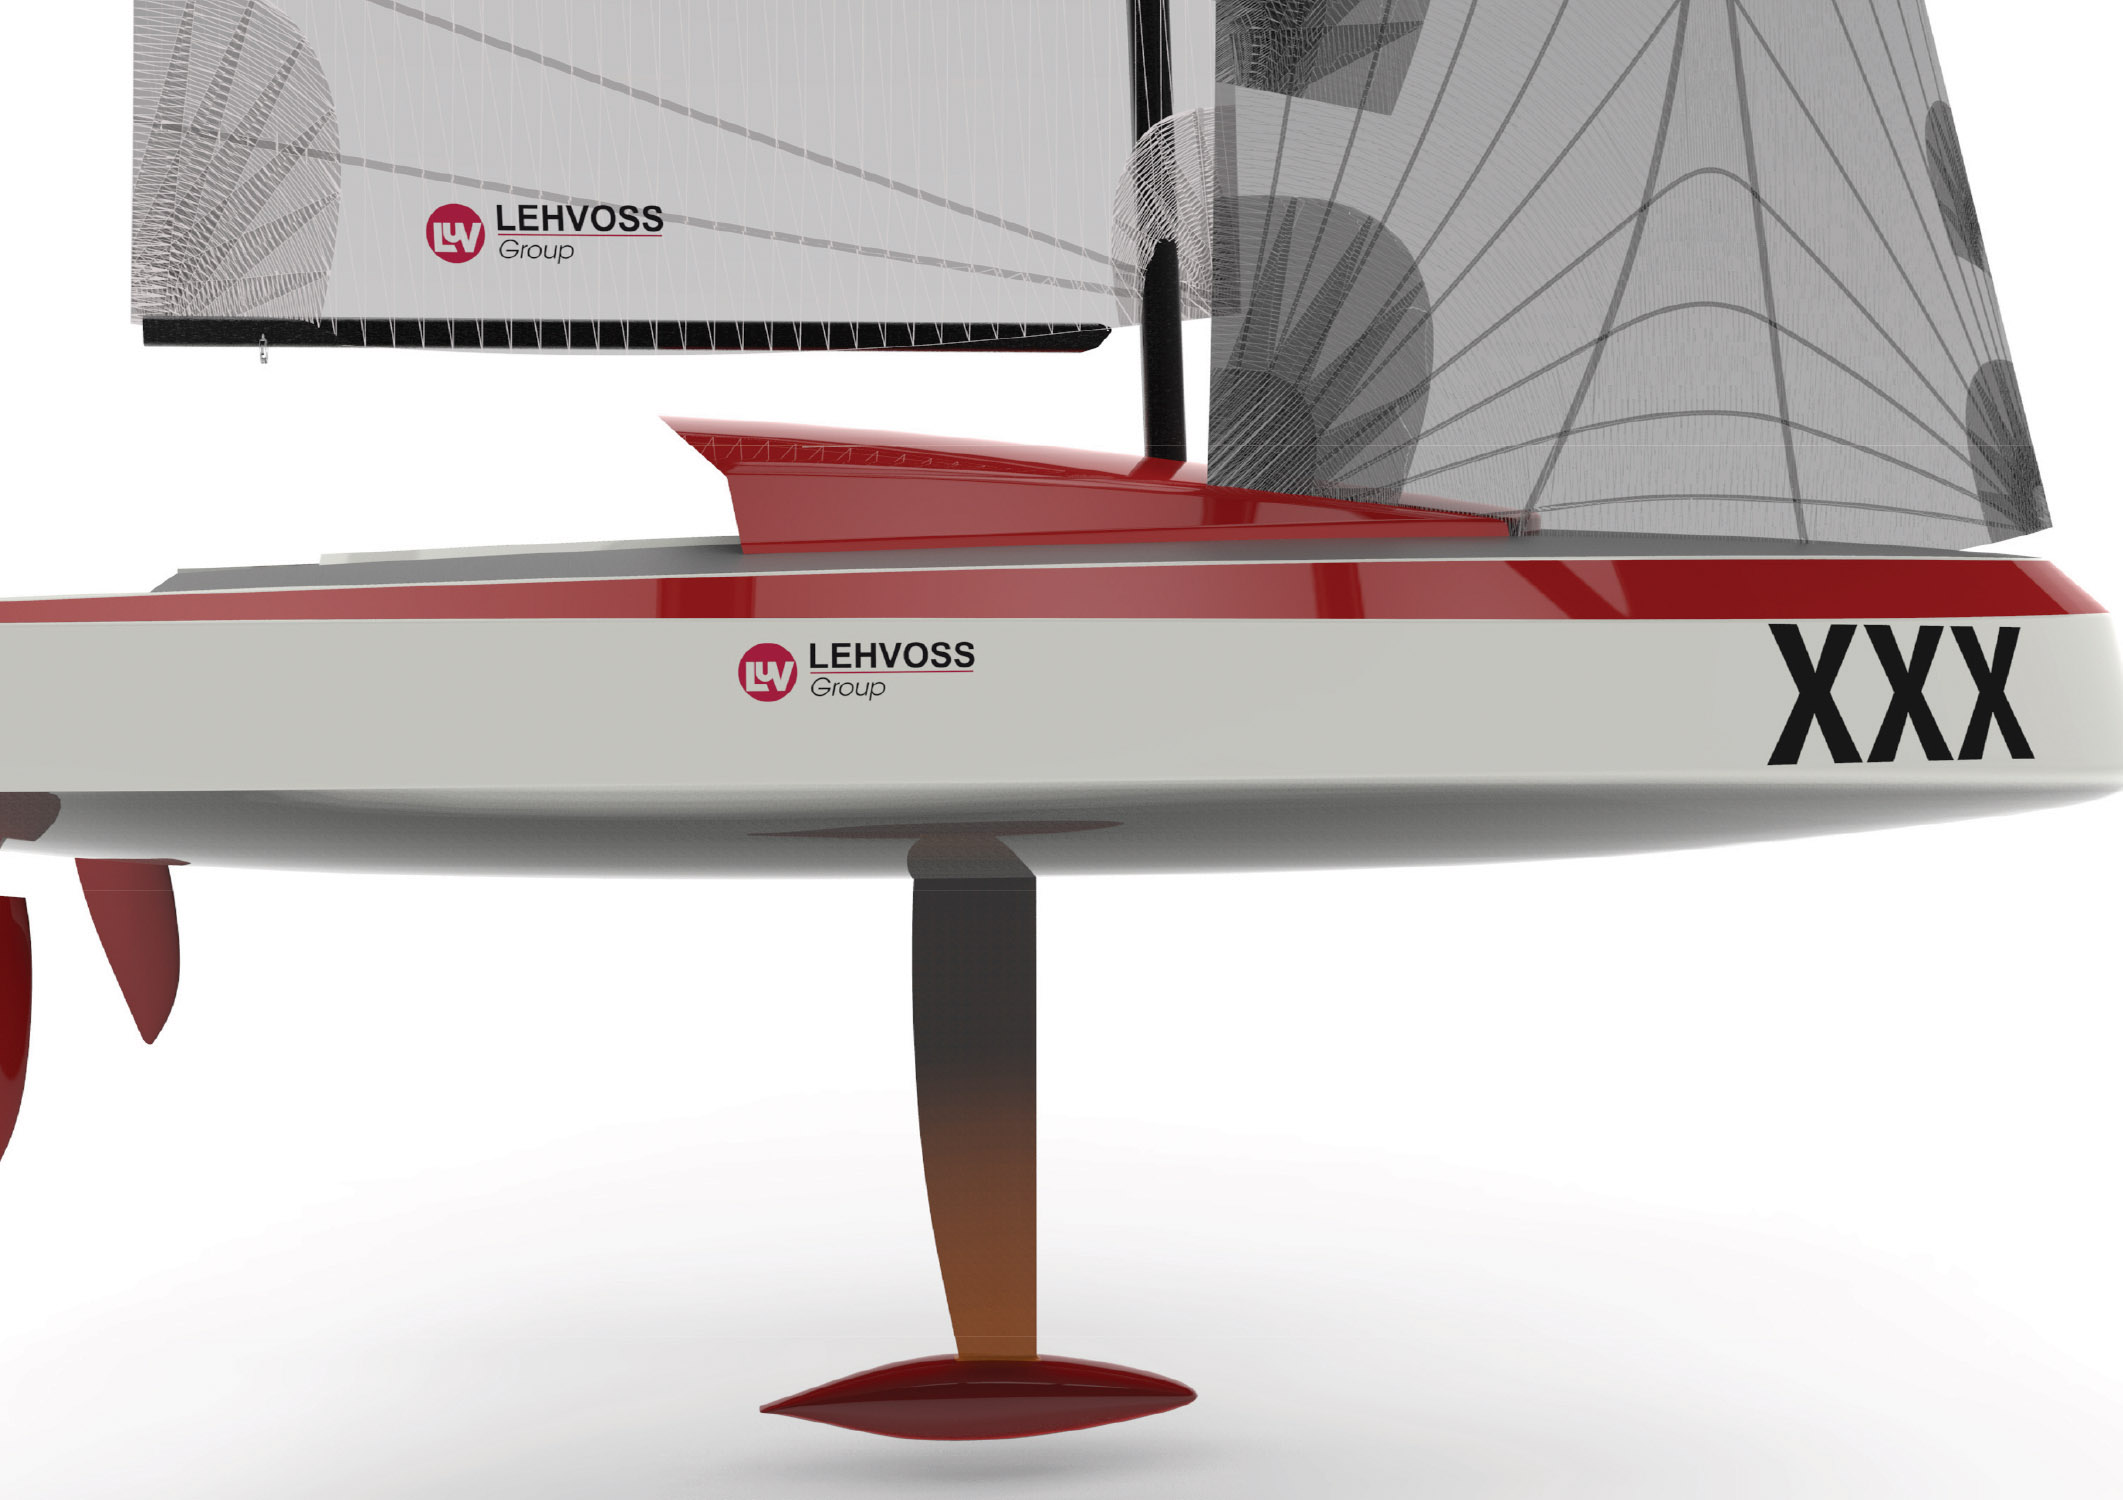 Lehvoss supplied materials to build what it says is the world’s first 3D printed sailboat.